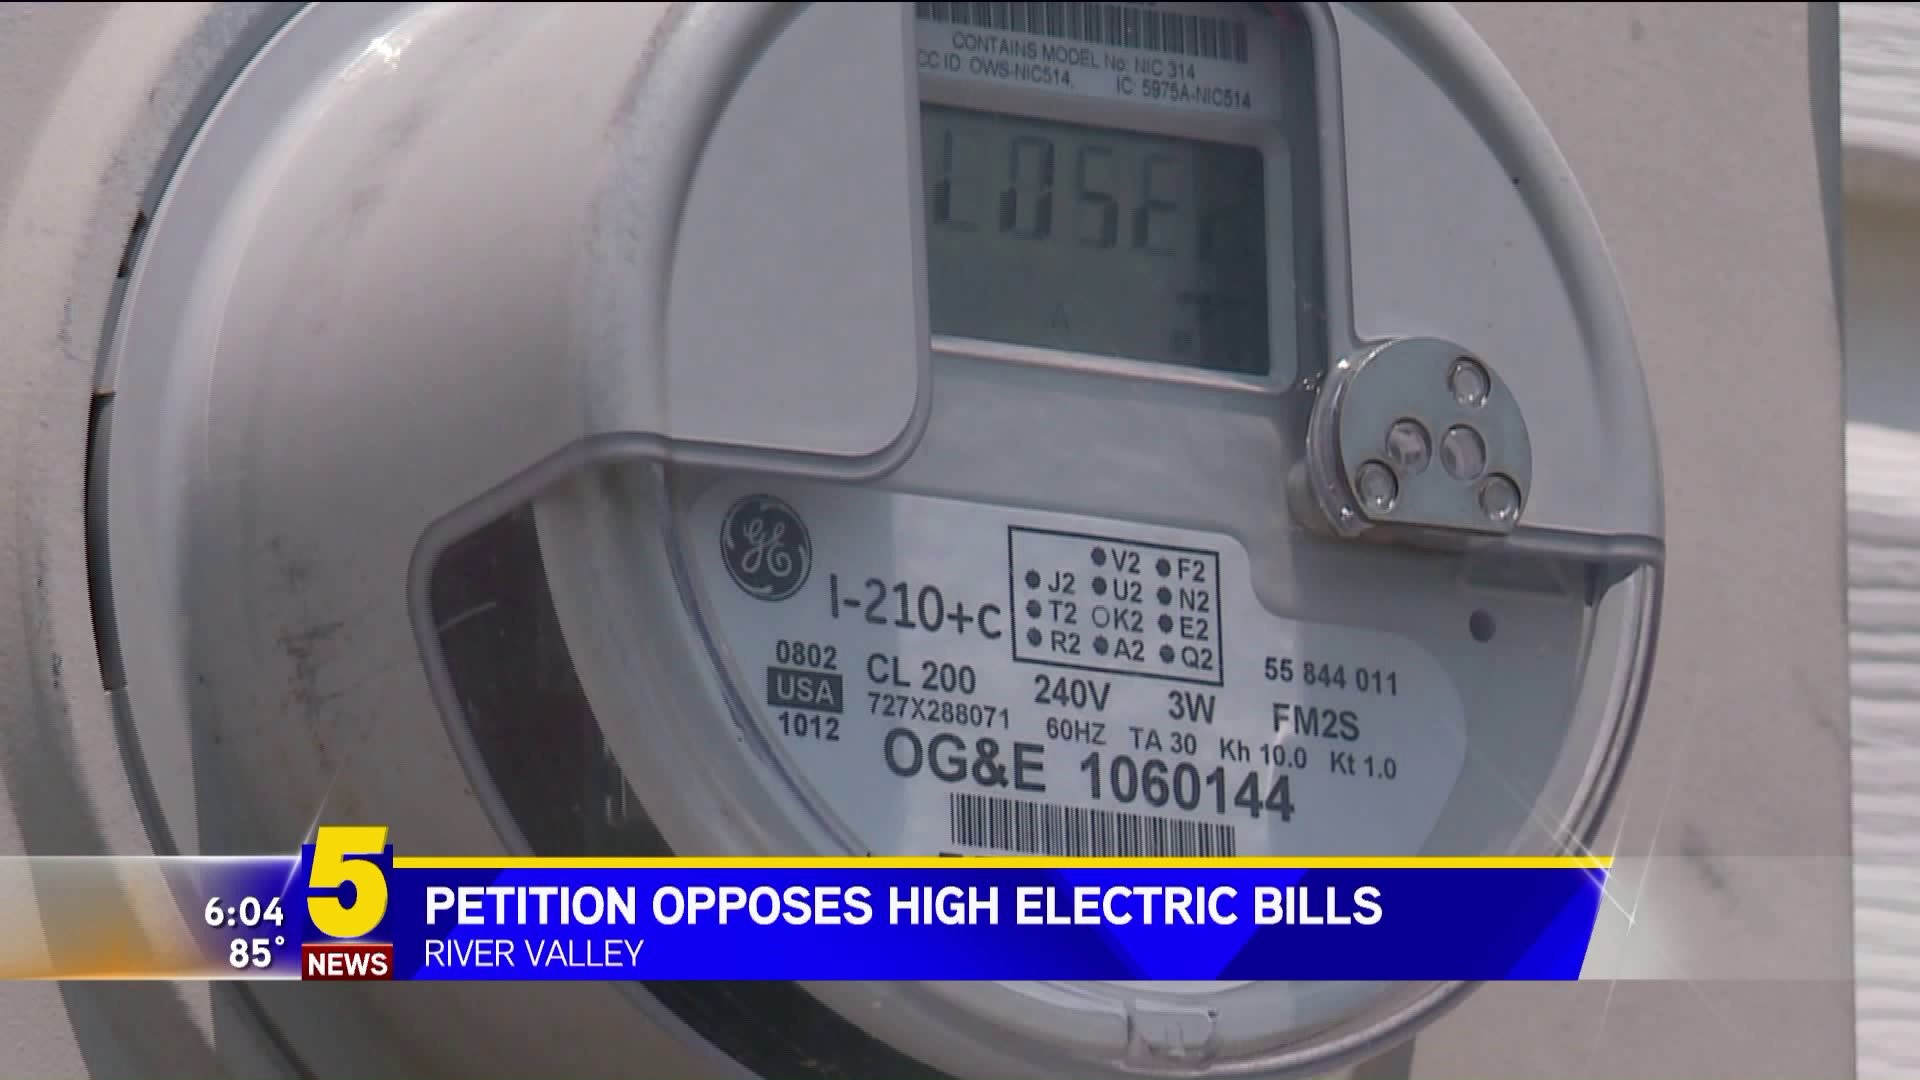 Petition Opposes High Electric Bills